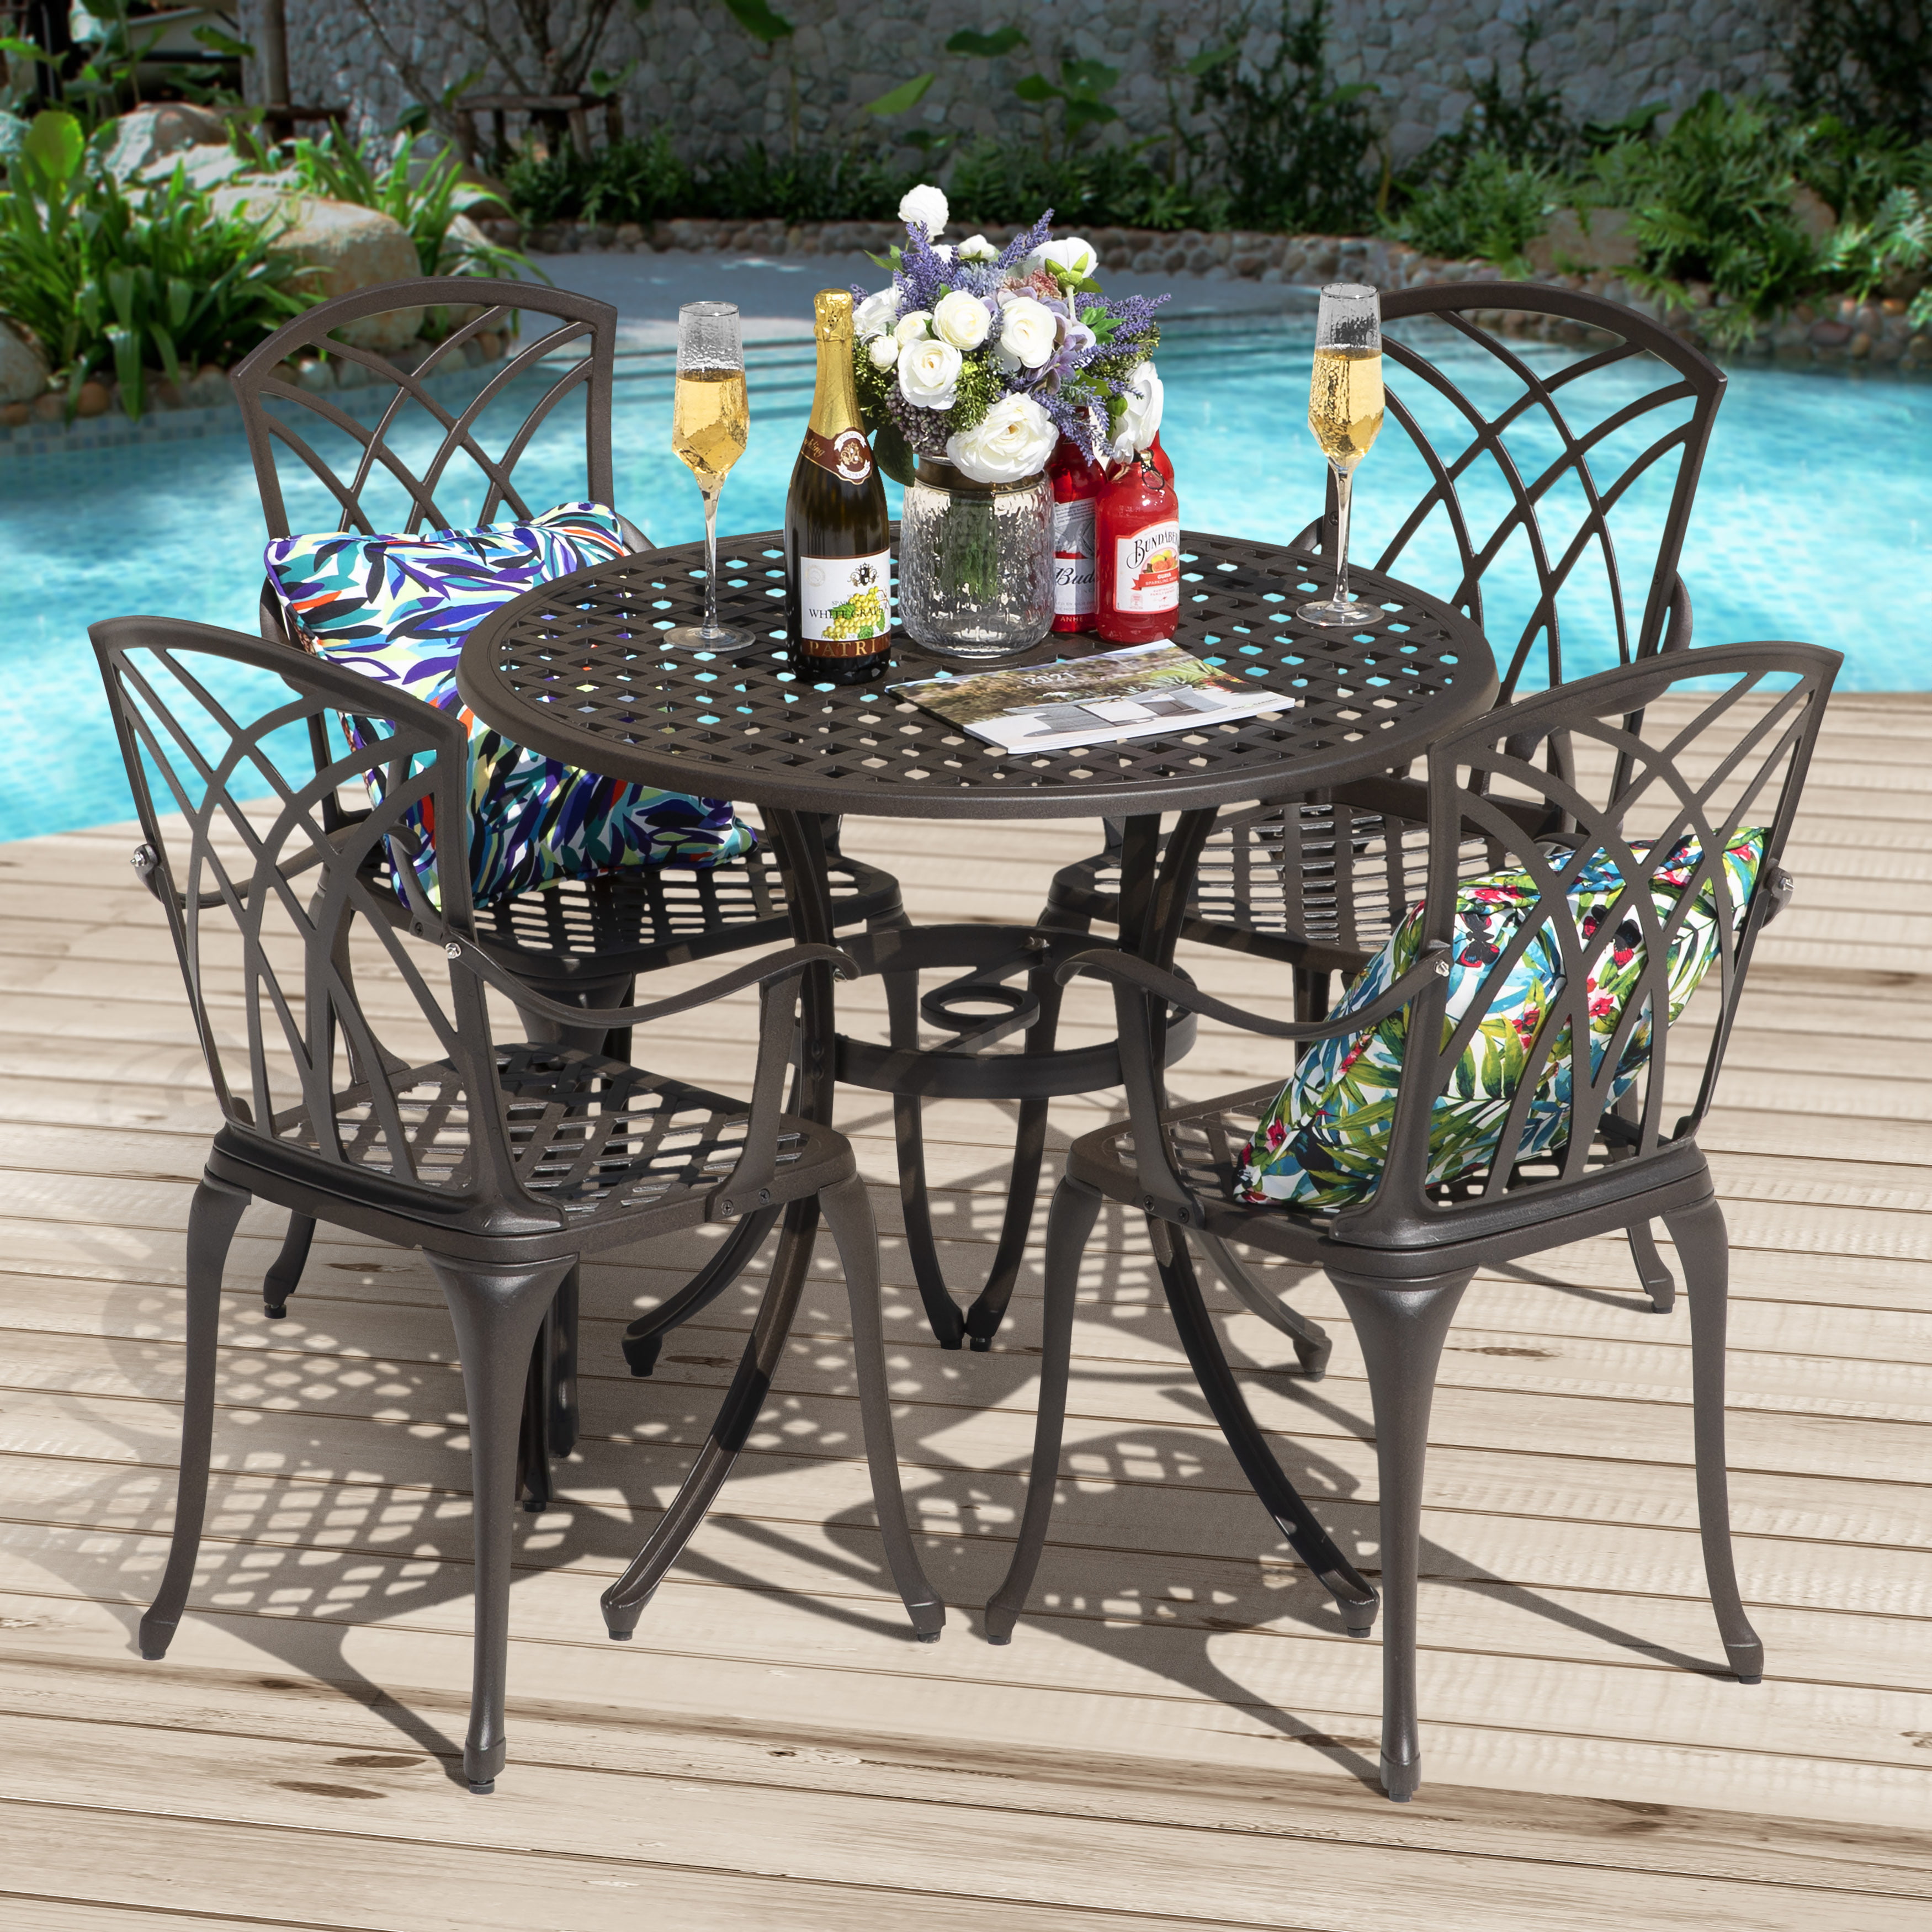 1 Round Table + 4 Chairs Without Cushion Weather-Resistant Conversation Set 5-Piece Patio Dining Set Outdoor Cast Aluminum Table & Chair Set Patio Dining Table Set with Umbrella Hole